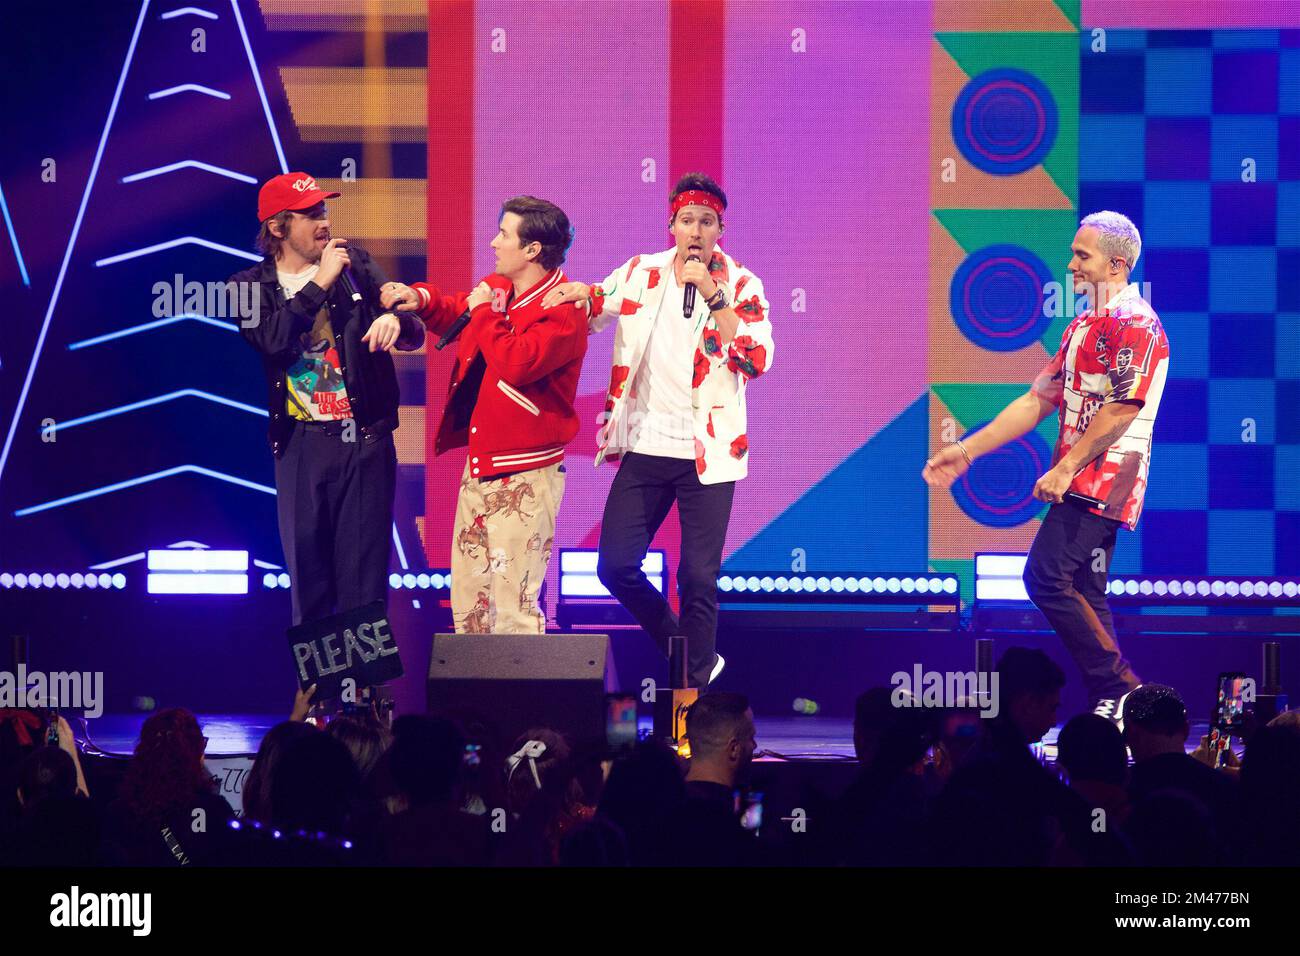 MIAMI, FLORIDA - DECEMBER 18: Big Time Rush perform onstage at iHeartRadio  Y100's Jingle Ball 2022 Presented by Capital One at FLA Live Arena on  December 18, 2022 in Miami, Florida. (Photo